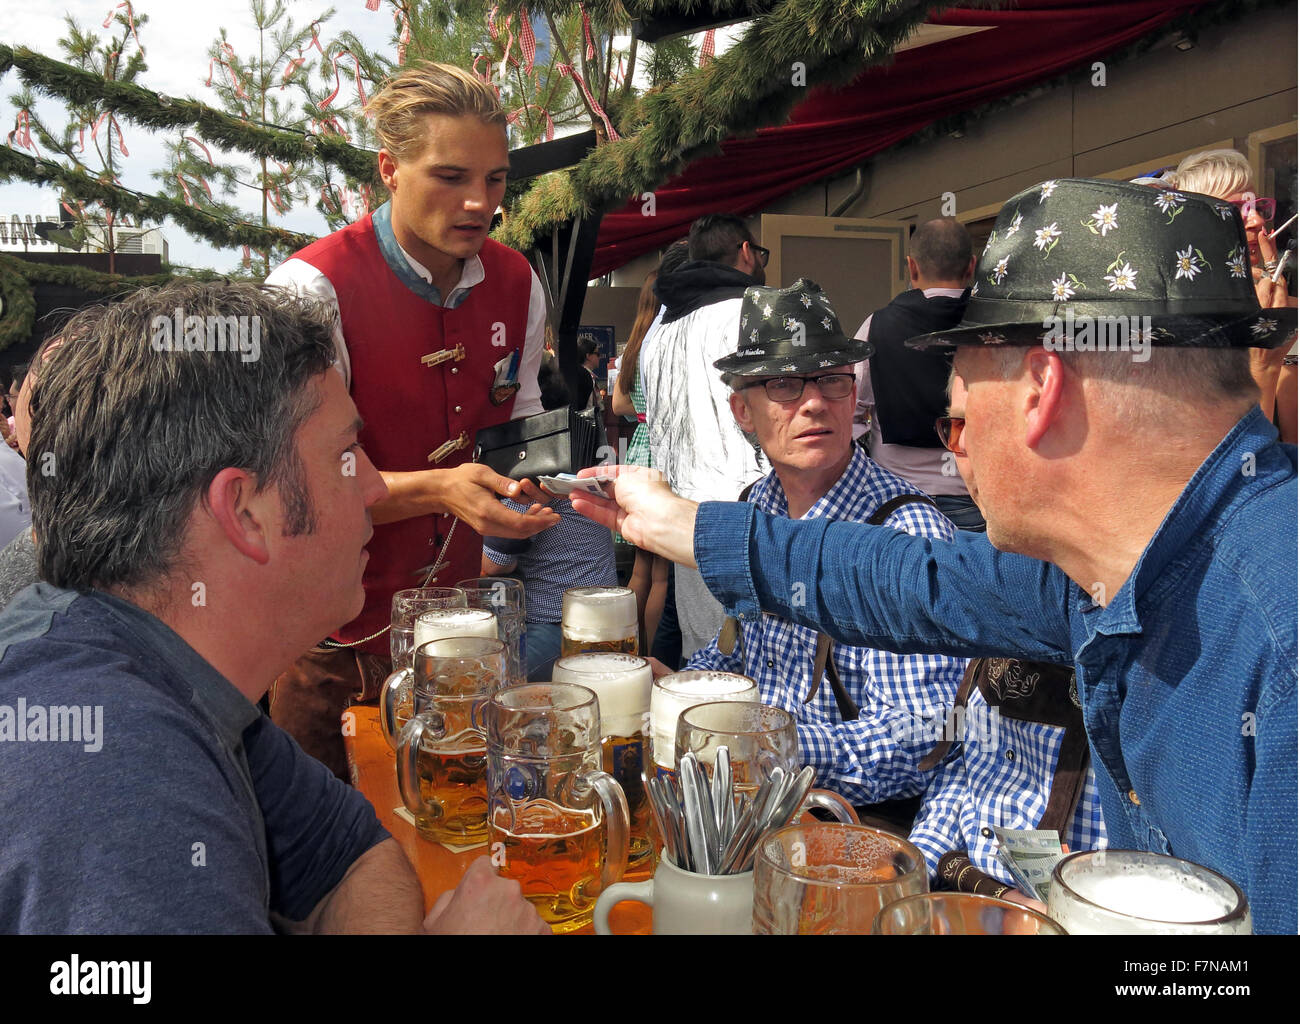 Paying for beer, table of men at the Oktoberfest, Munich, Bavaria, Germany Stock Photo